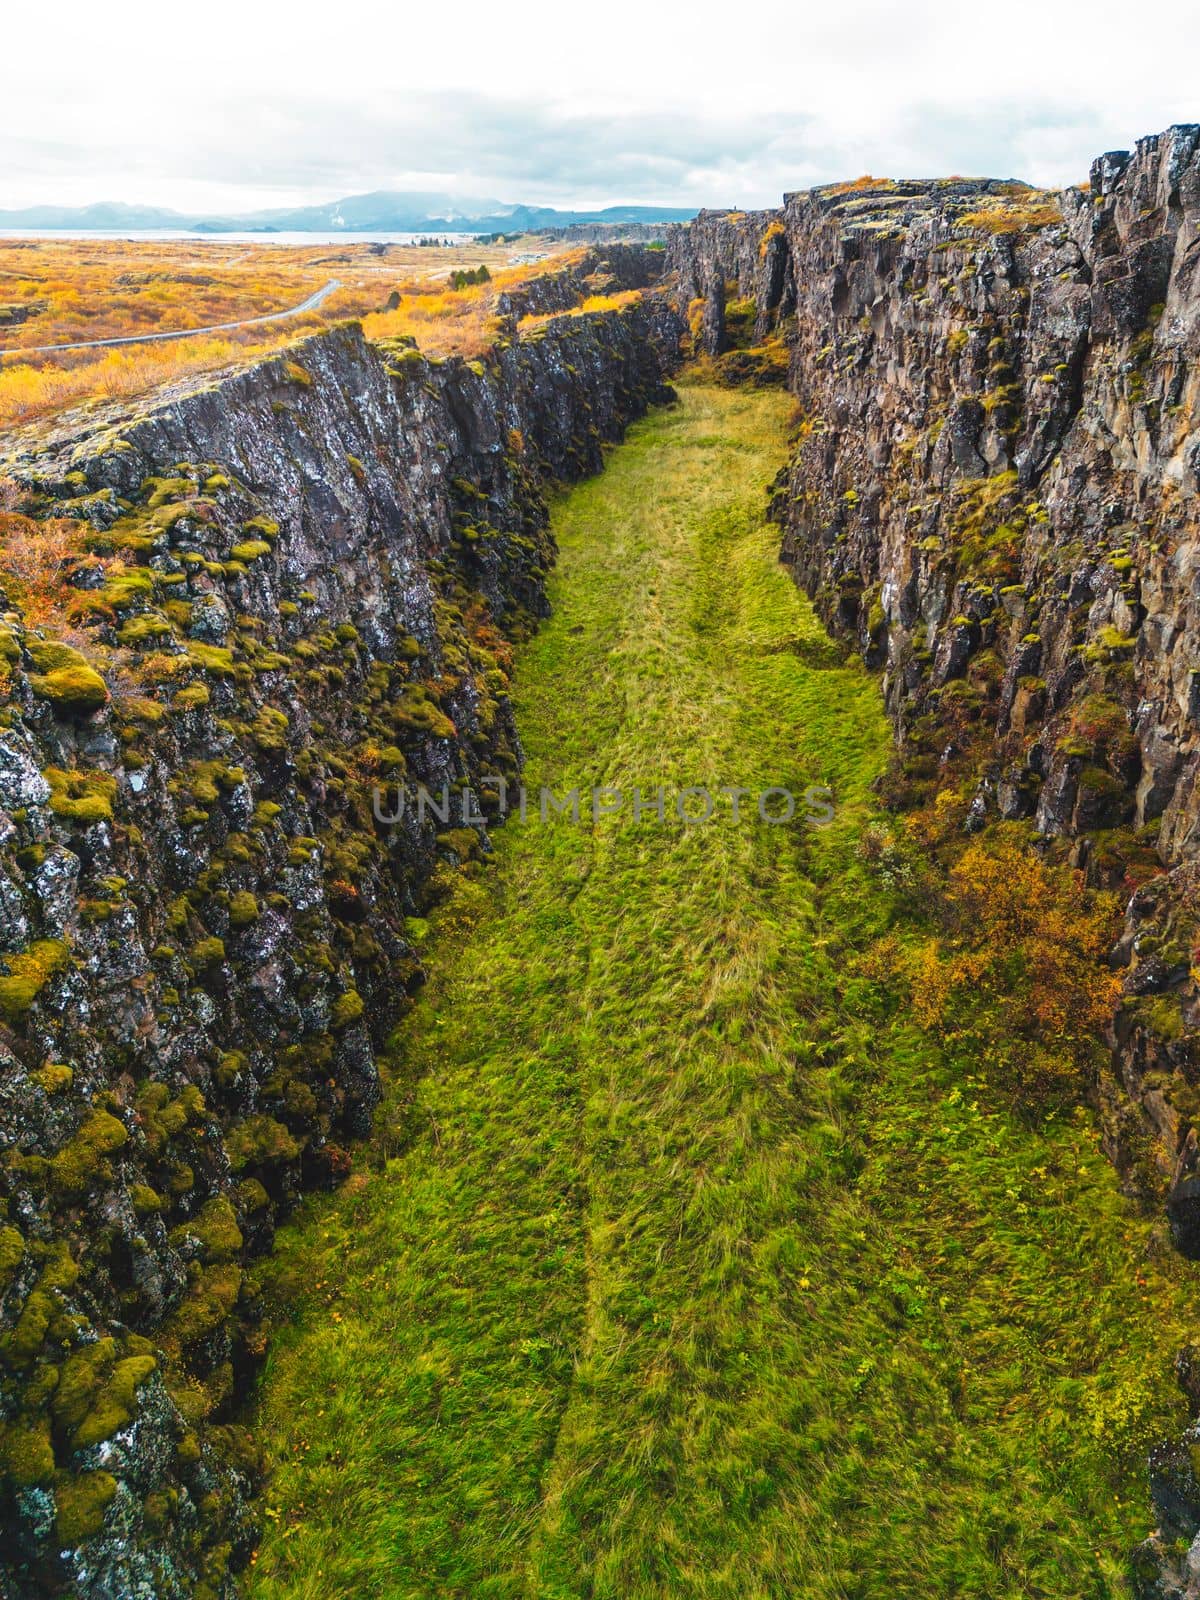 Vertical view of two tectonic plates meeting visible on the surface of Earth - Thingvellir National Park, Iceland by VisualProductions